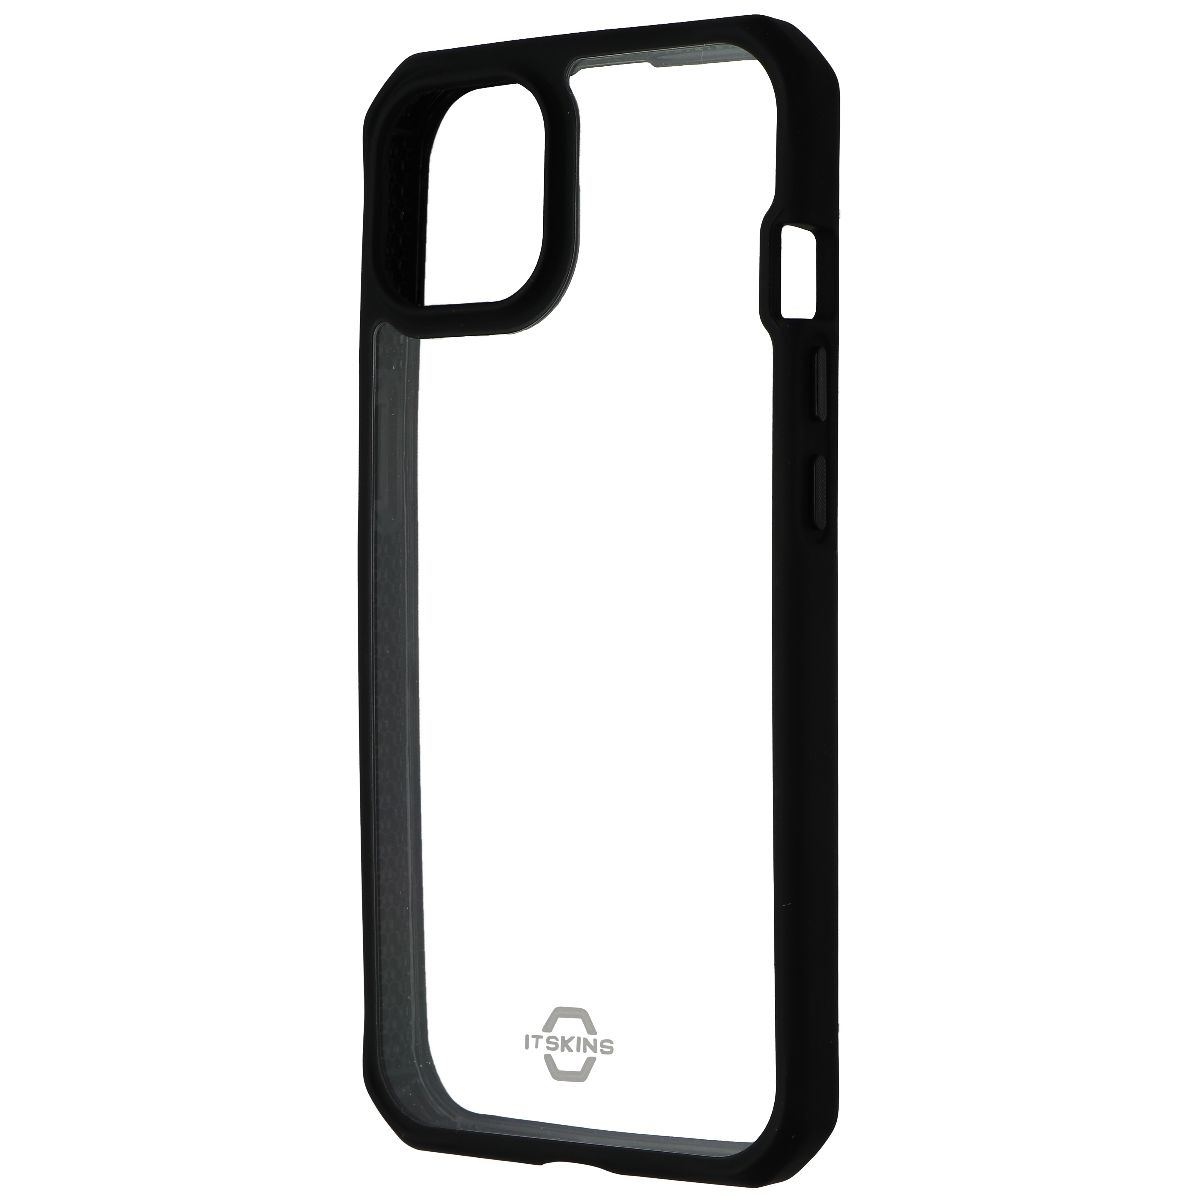 ITSKINS Knox Pro Series Case For Apple IPhone 13 - Black/Clear (Refurbished)